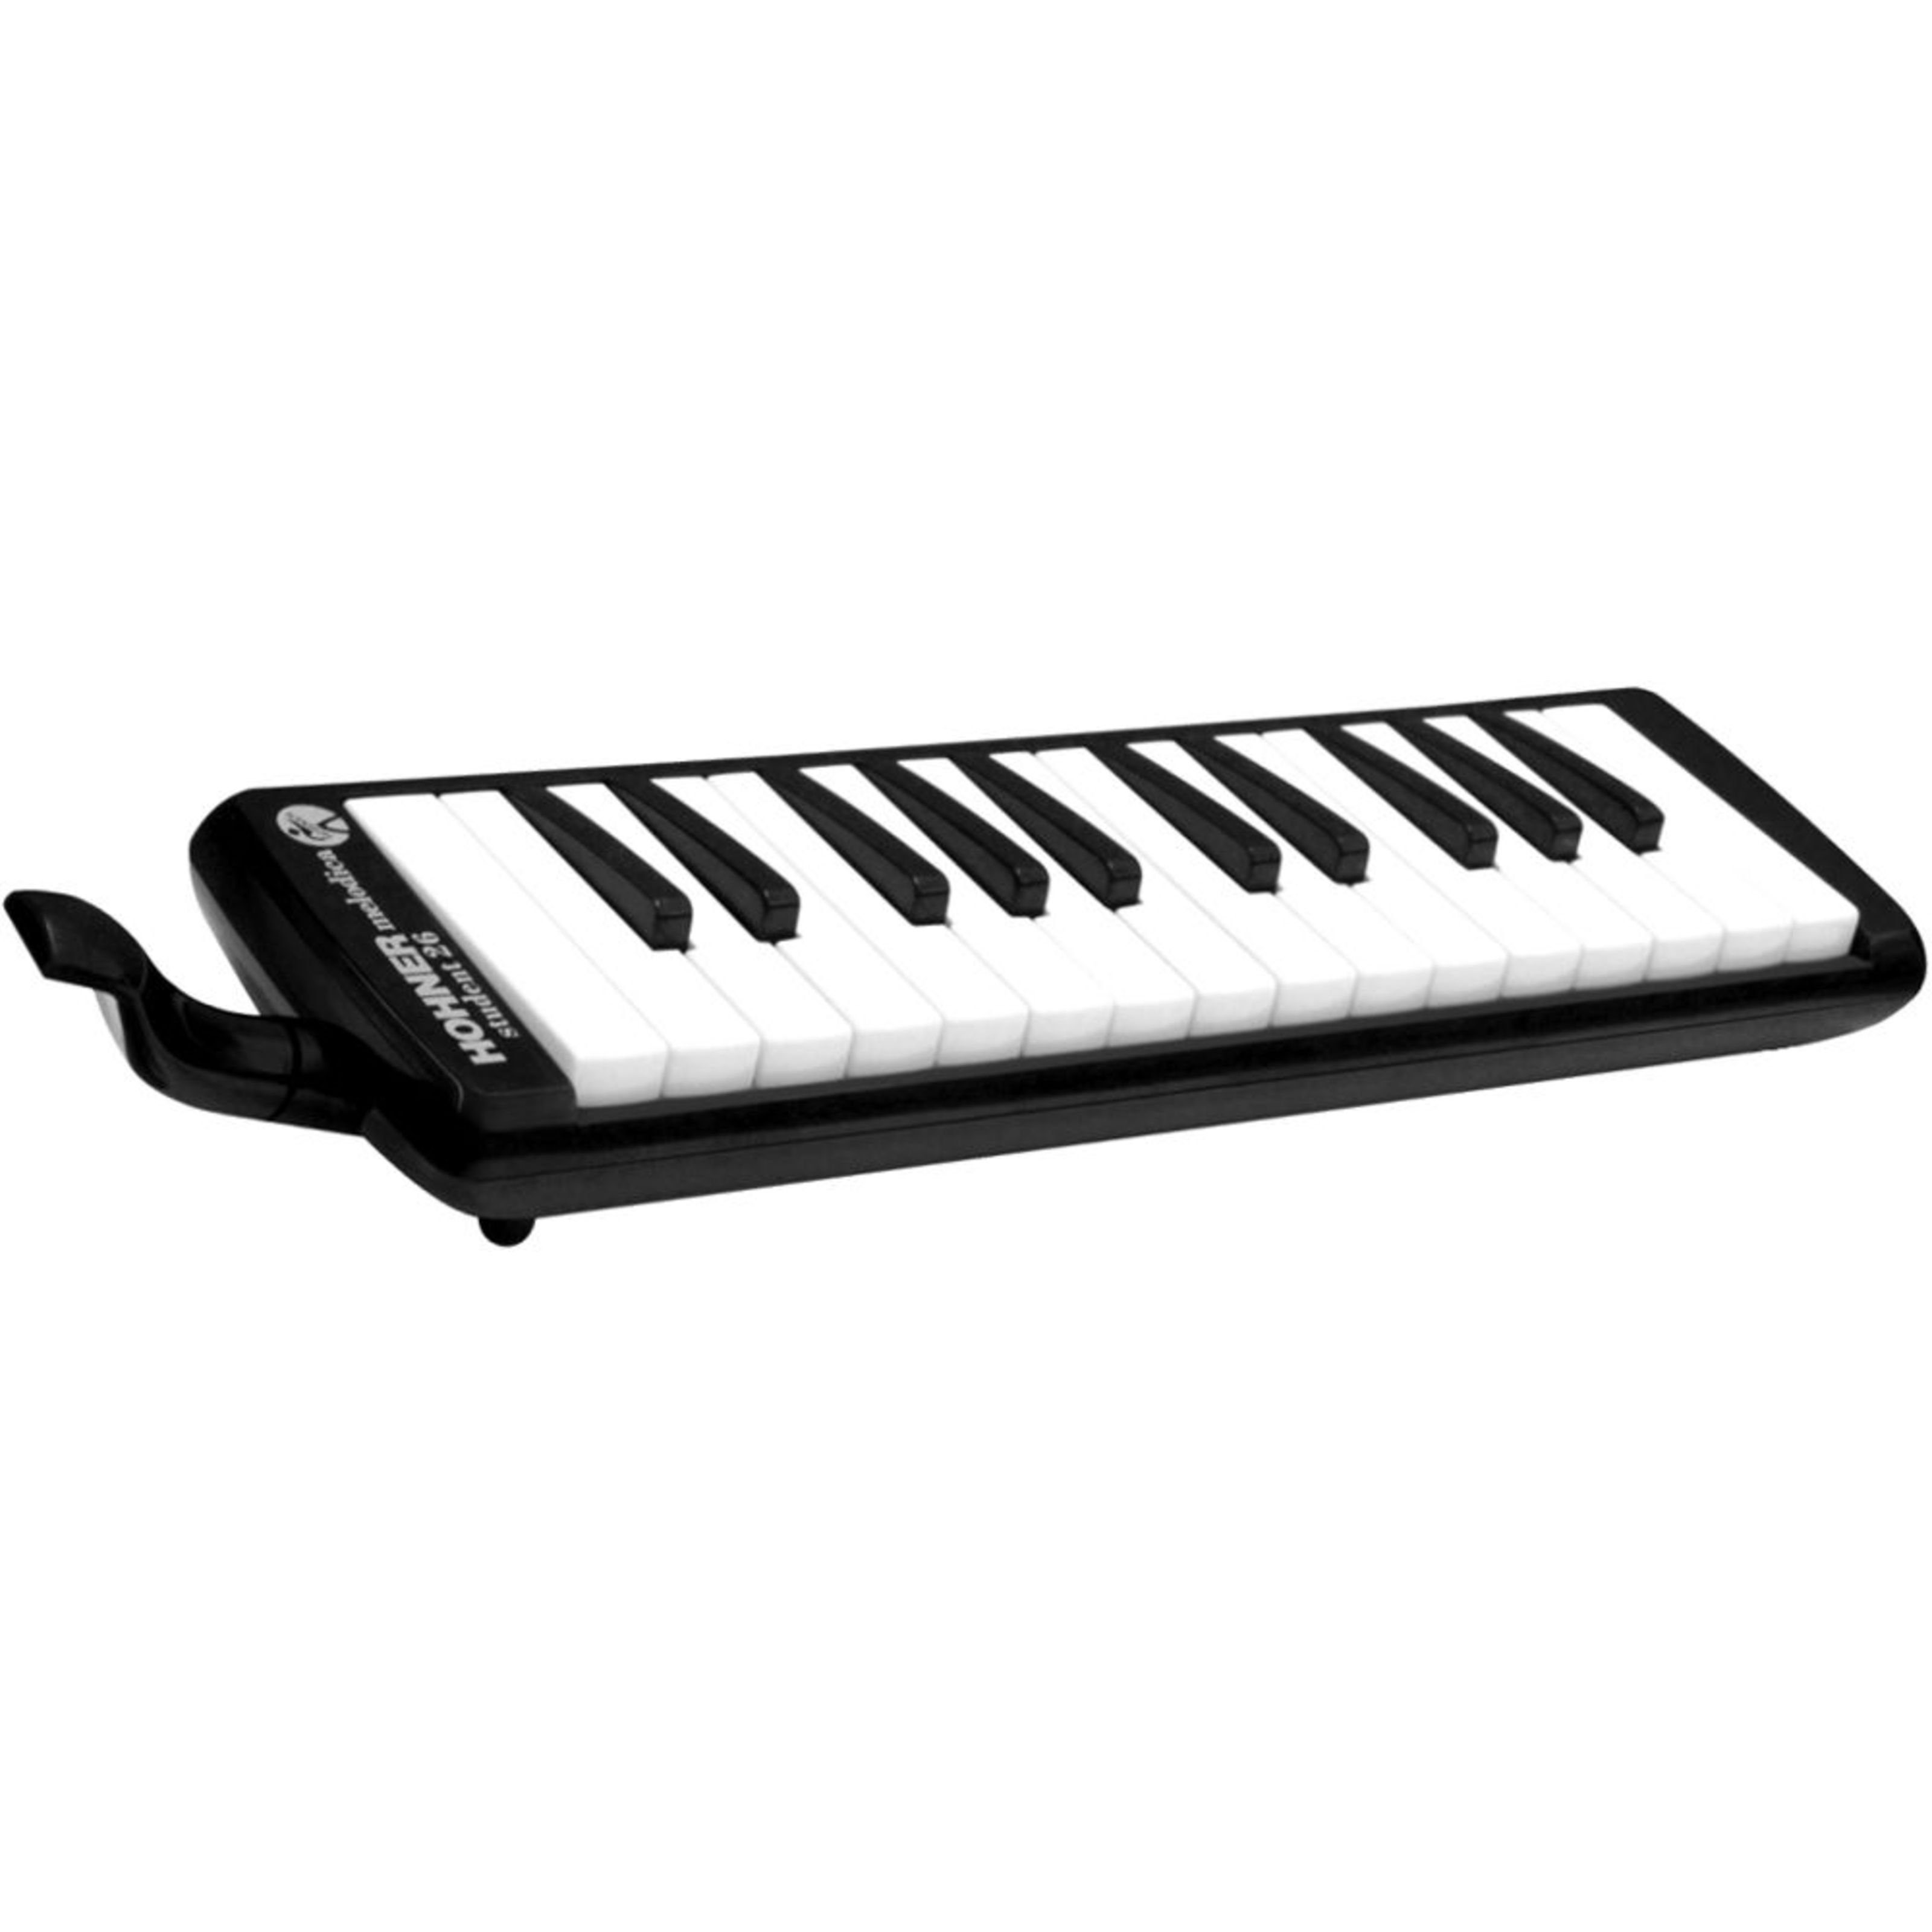 Hohner Melodica, Student Melodica 26 black, Student Melodica 26 black - Melodica